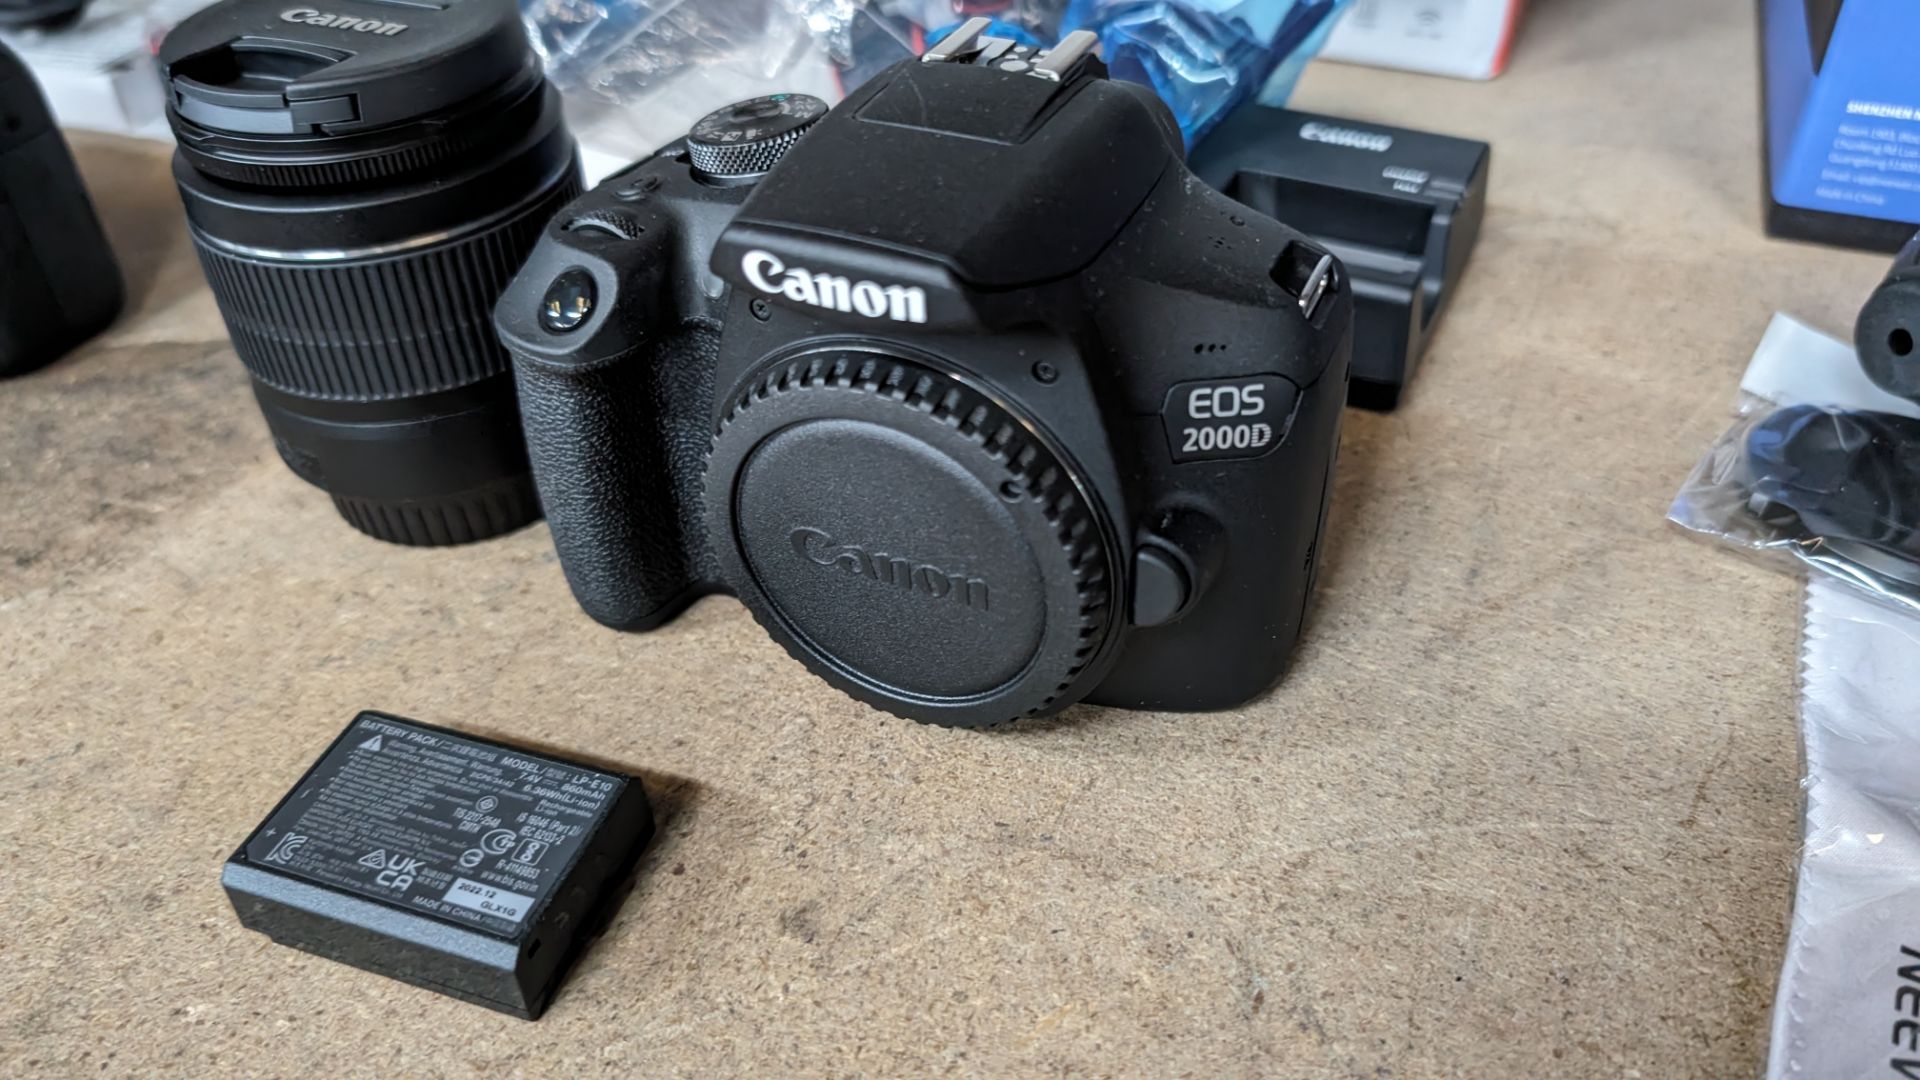 Canon EOS 2000D camera with EFS 18-55mm lens plus battery, charger, strap and more - Image 5 of 15